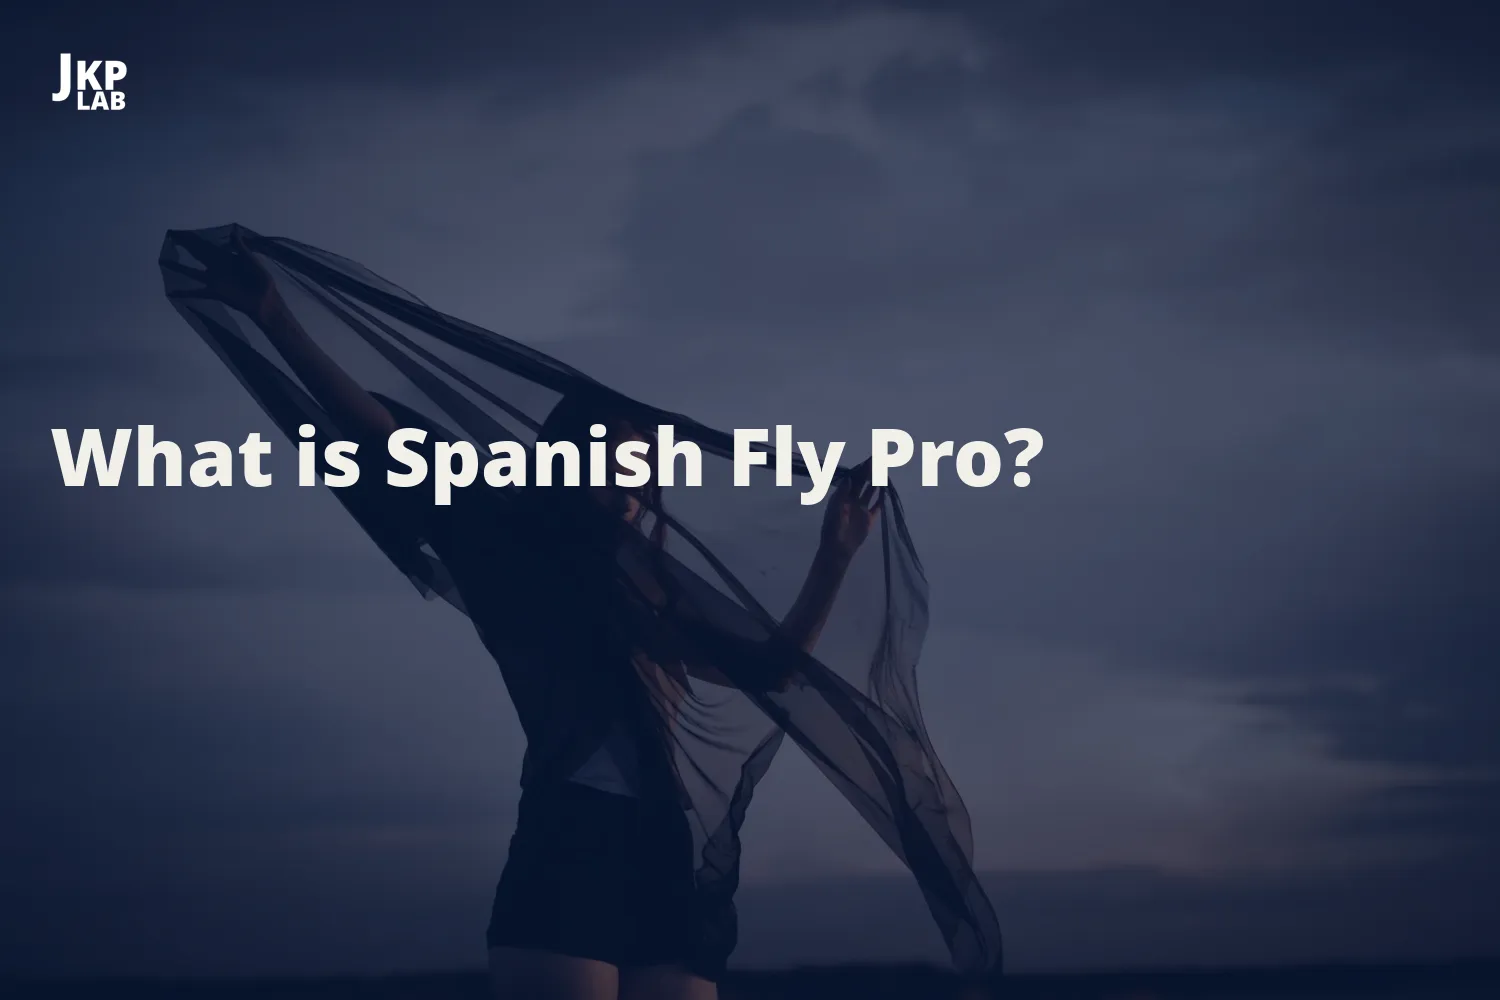 Spanish Fly's Impact on Emotional and Psychological Well-being